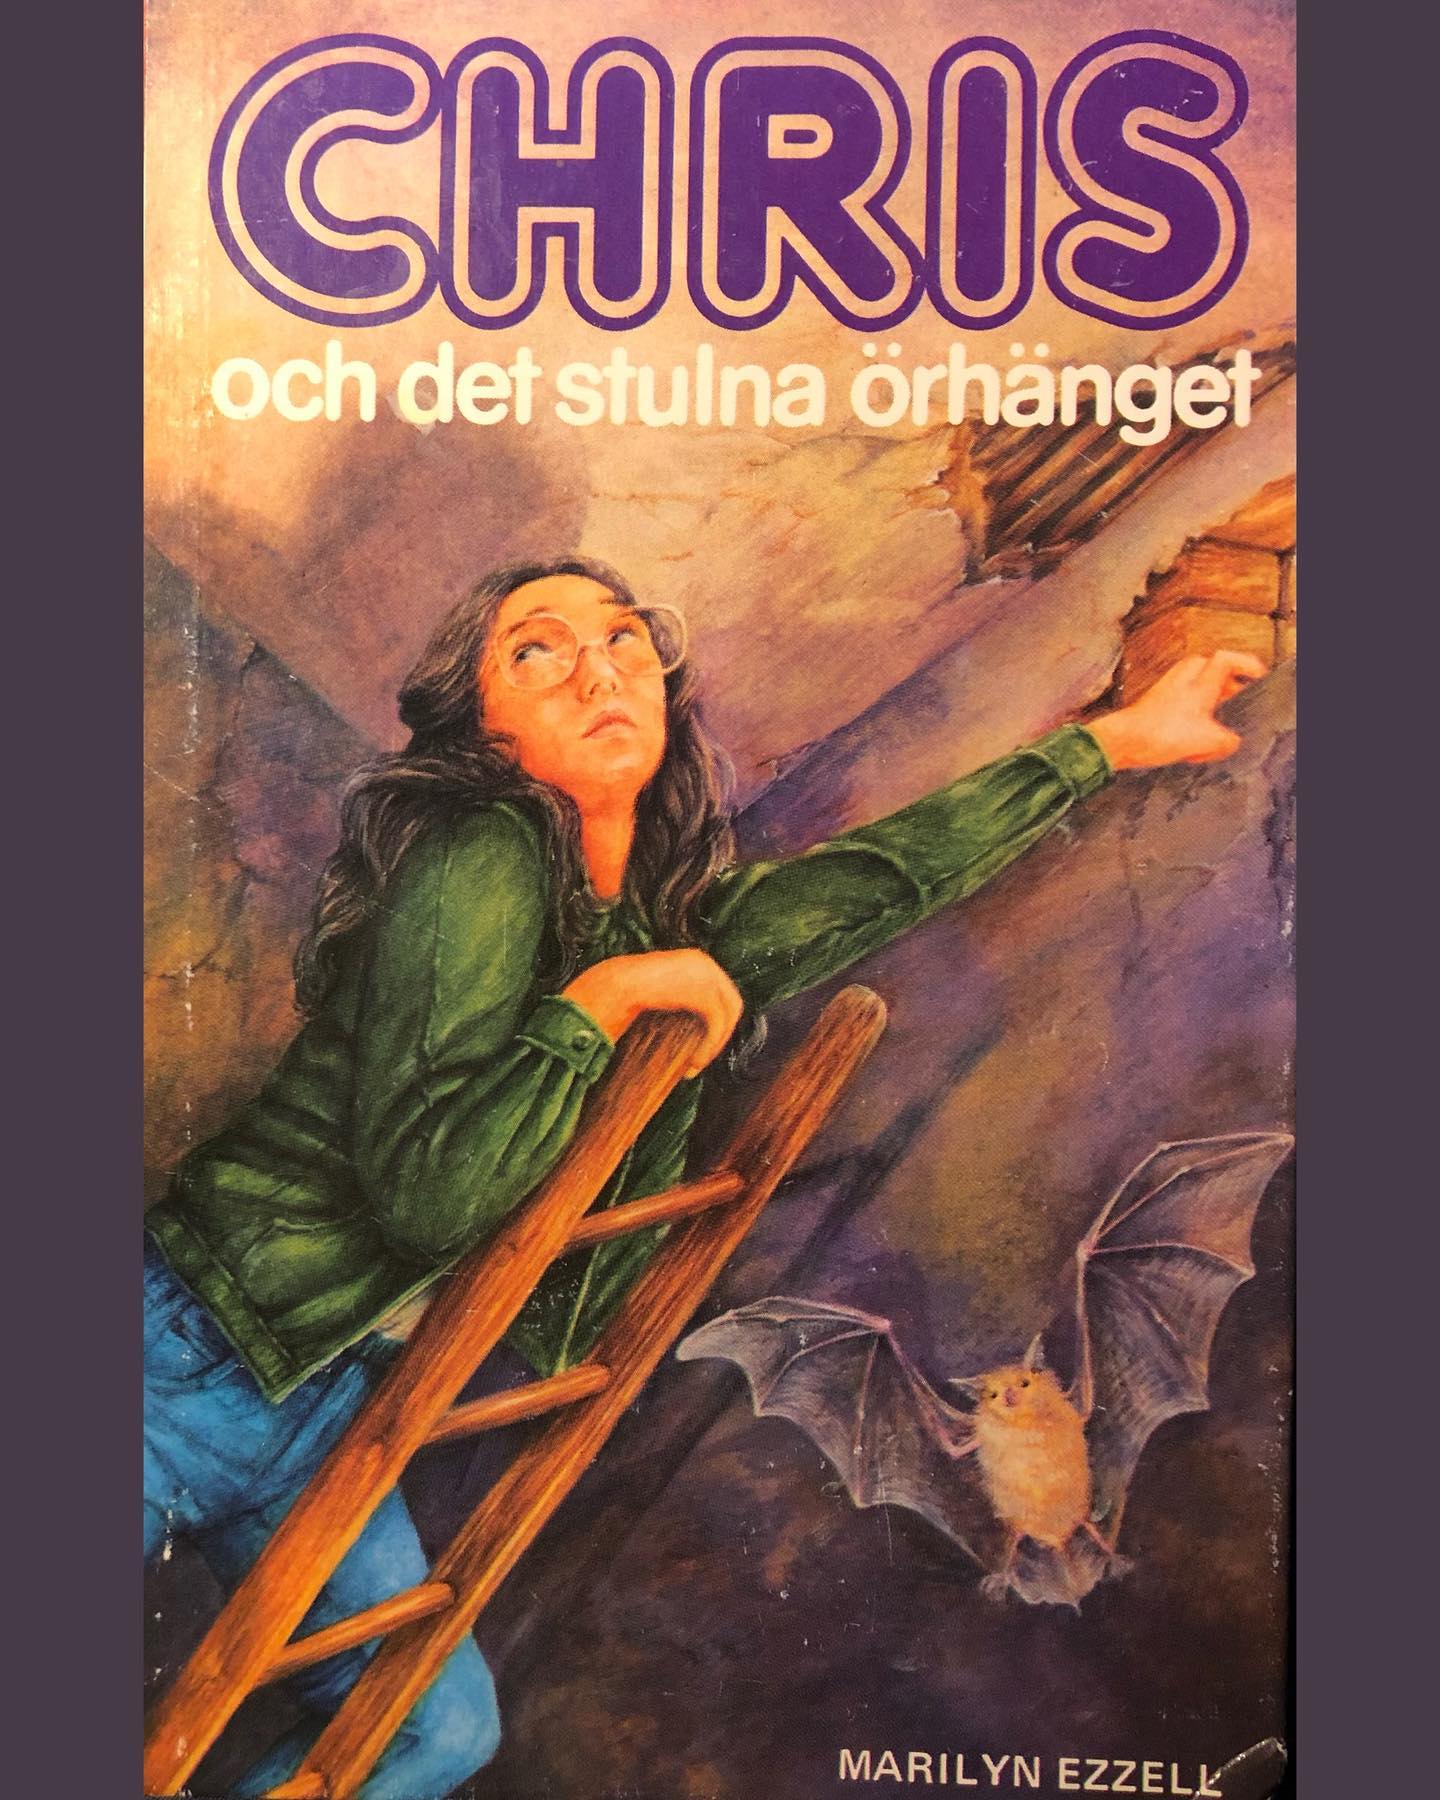 Am currently reading the first book in the #susansand series. Oddly she’s called Chris in the Swedish version. 🤔
Out of the eight books in the series only the first three got translated to Swedish. 
The books were written between 1982-1984 and Susan/Chris was introduced as a modern Nancy Drew. Having almost finished the first book I’m not sure what that modern thing is supposed to be. Is it her glasses? 🤓. Otherwise she’s like most of the other teen sleuths and there’s no harm in that. 😃
Please note the cute bat too 🦇 
#bwahlströmsungdomsböcker #flickböcker #chrisochdetstulnaörhänget #susansandmysterystories #marilynezzell